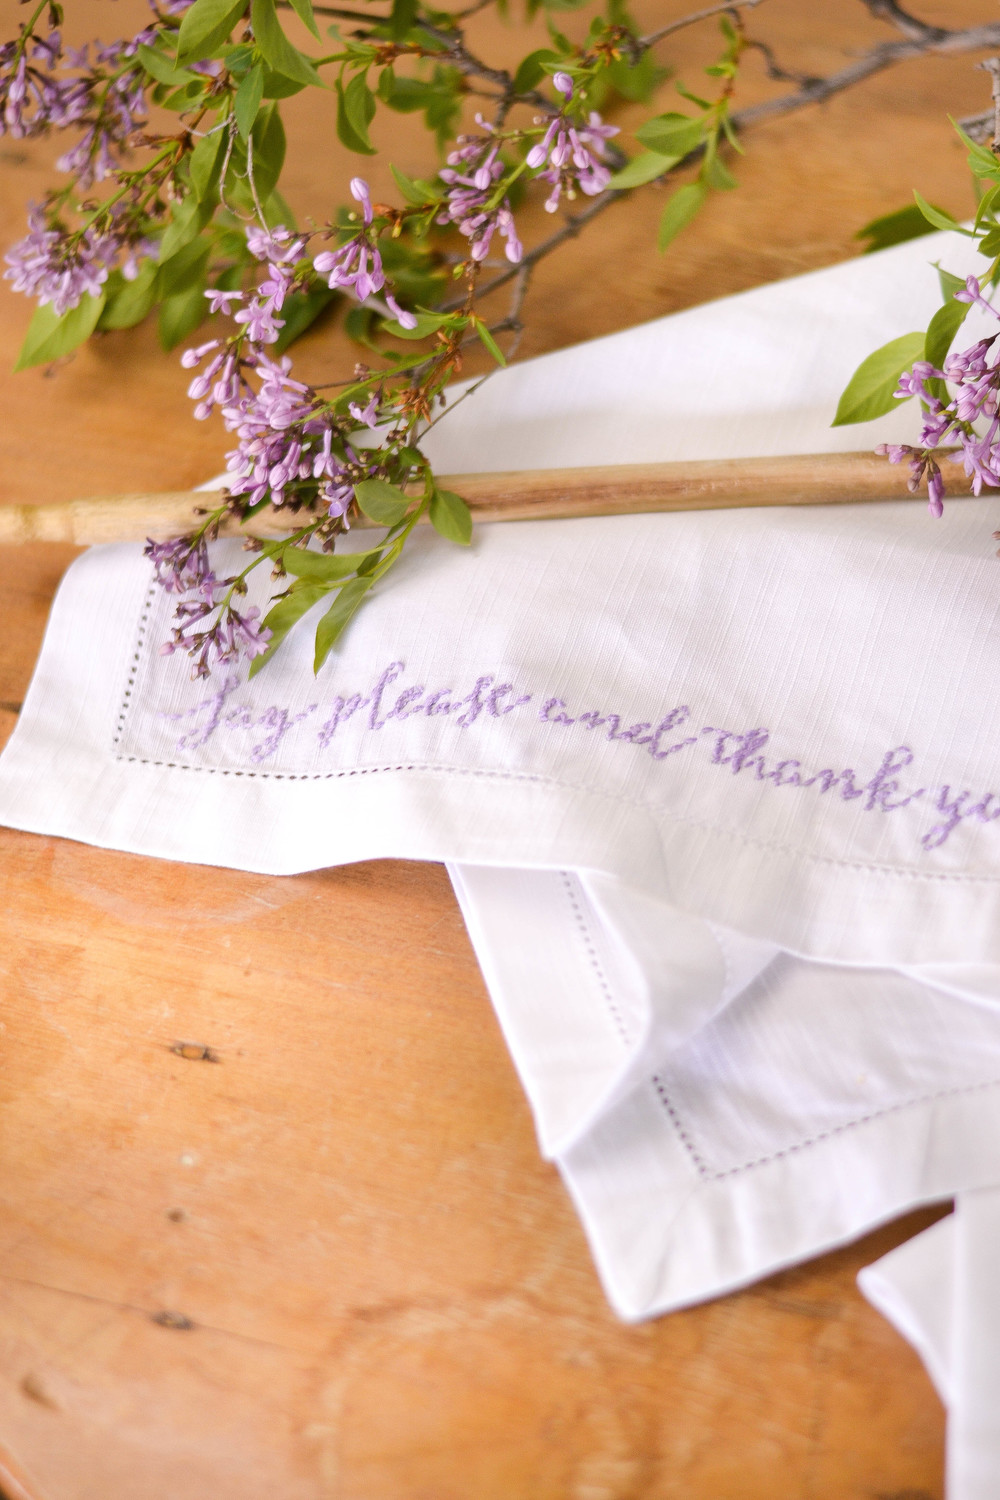 DIY Embroidered Napkins with Quotes for Mother's Day | boxwoodavenue.com